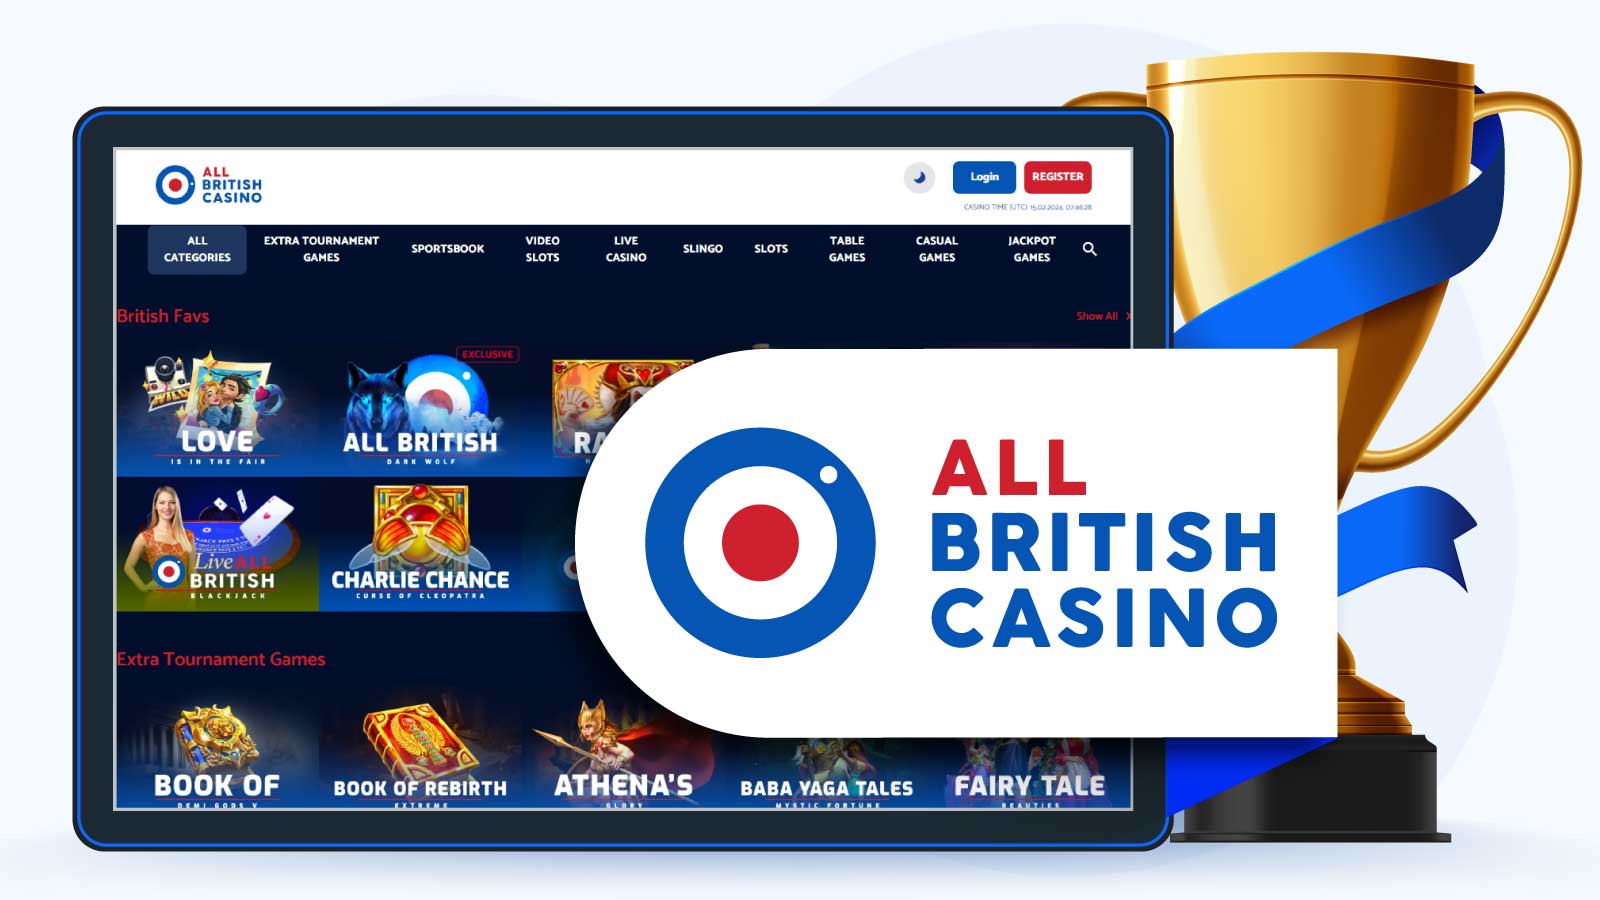 All British Casino – Best for Game selection